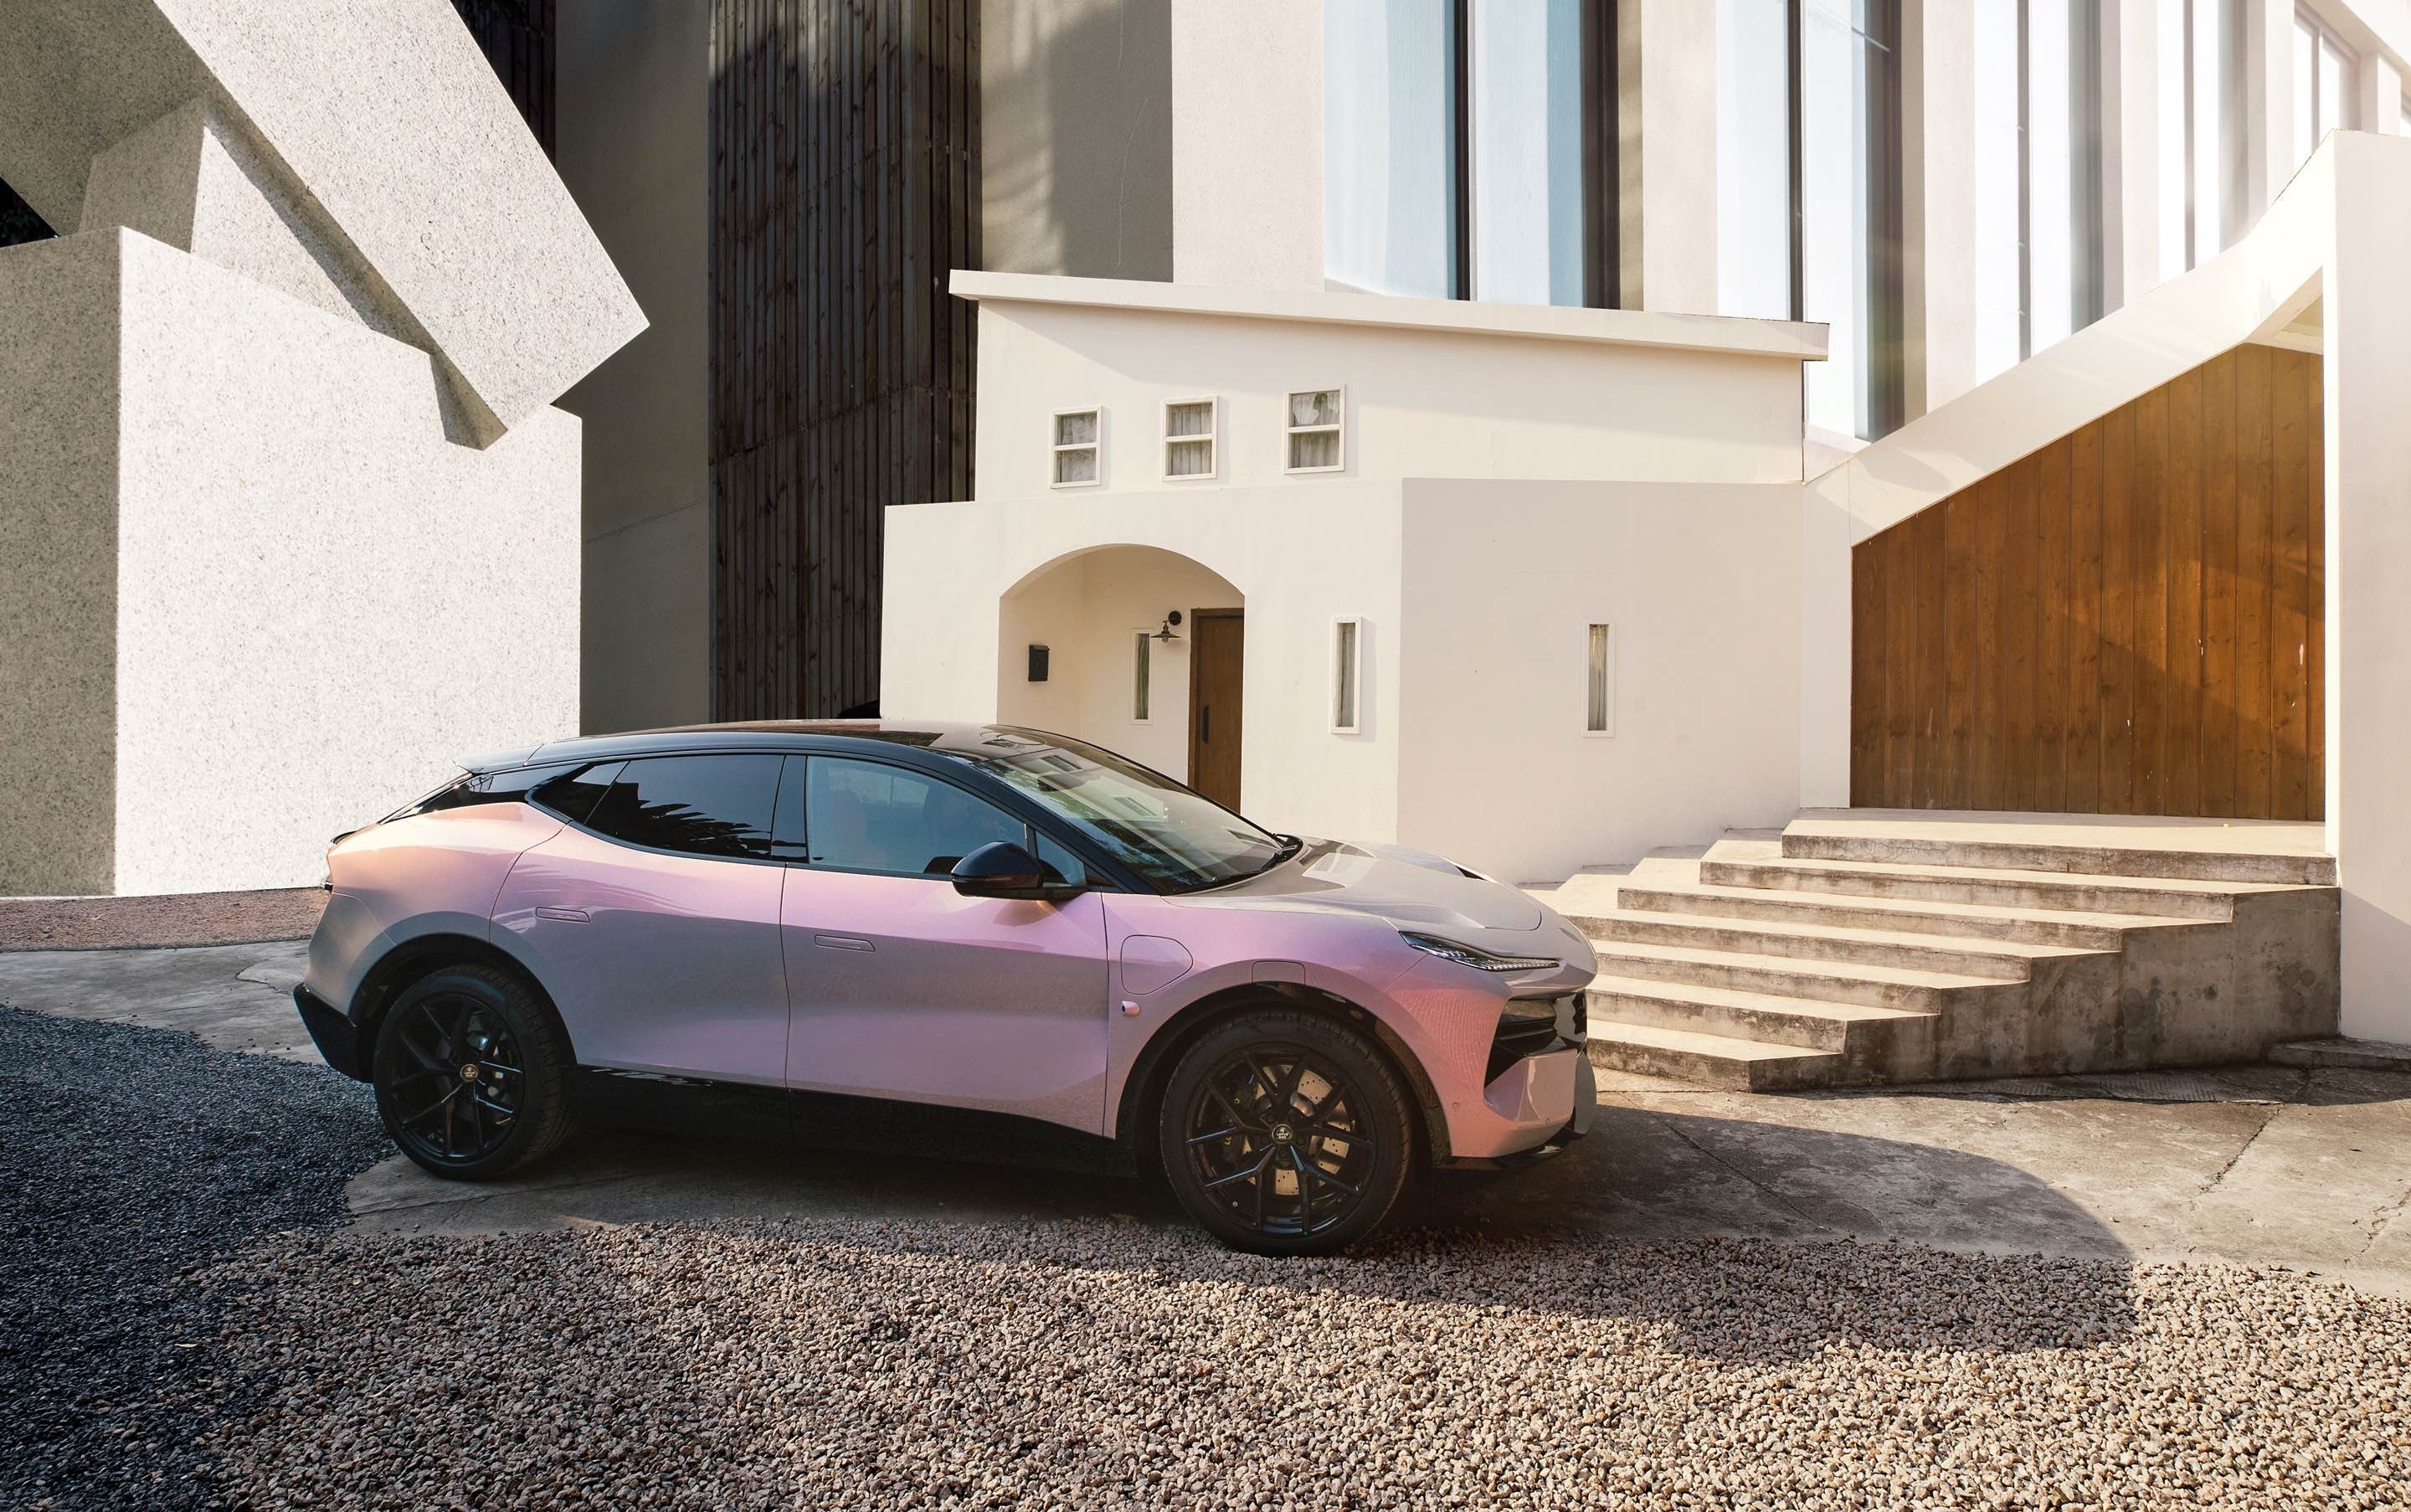 Lotus Technology launched sales of its first EV, the Eletre, in China, the UK and Europe late last year. A version in colours inspired by K-pop girl group Blackpink targets young female buyers. Photo: Handout